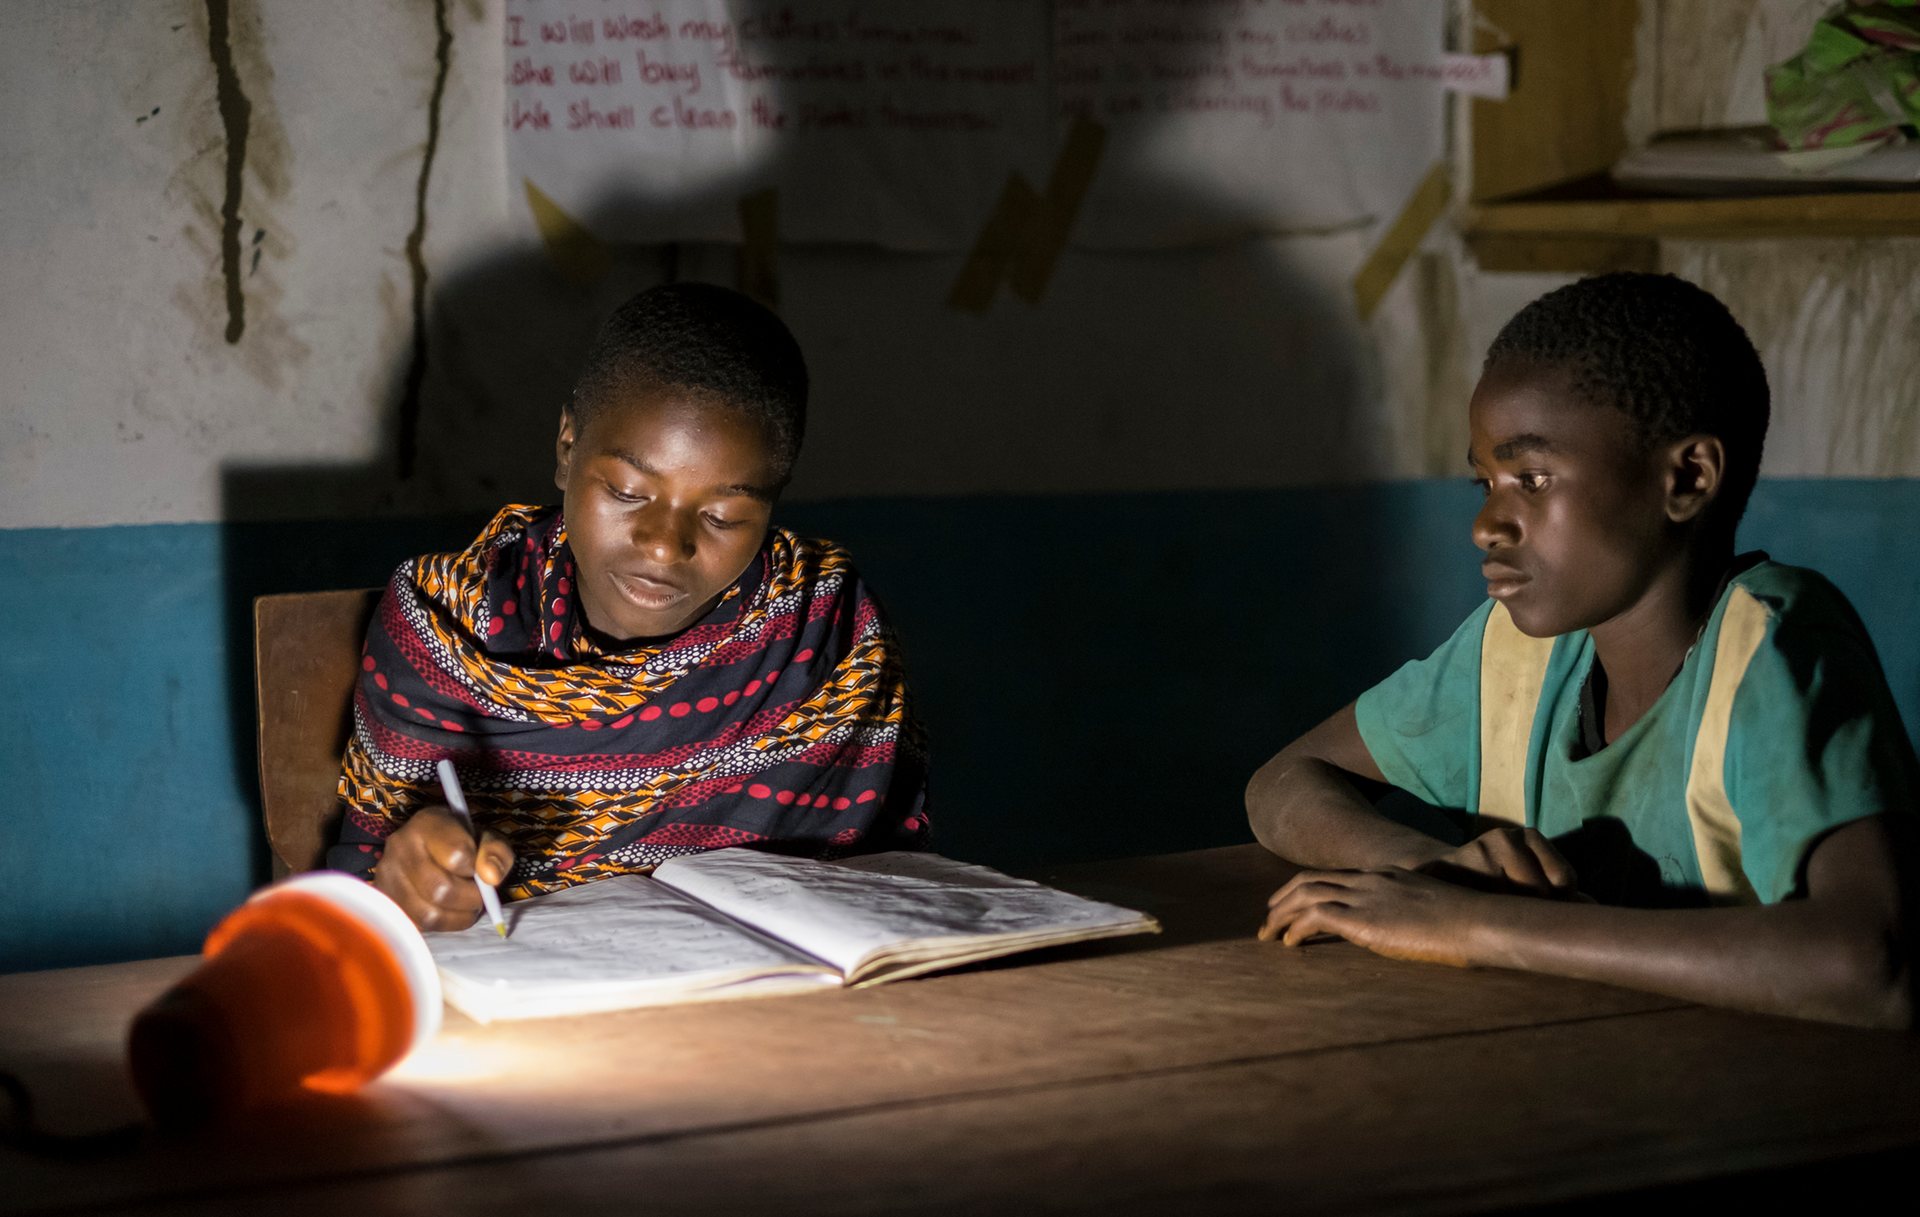 Pupils prepare for exams at night, using solar lamps, in Gumbi library